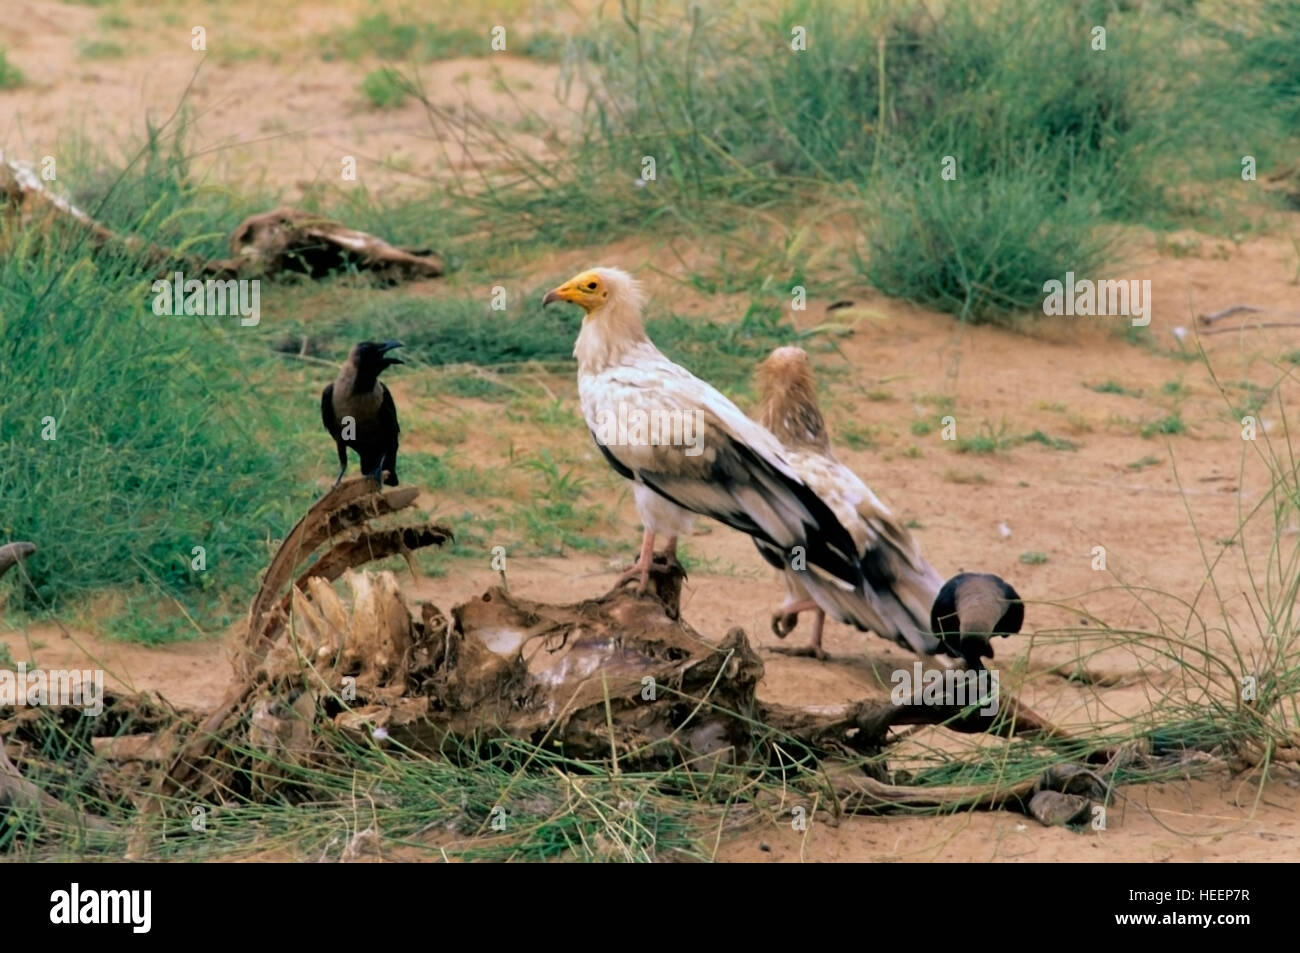 Egyptian Vulture, Neophron percnopterus, on cattle caracass, Rajasthan, North India Stock Photo